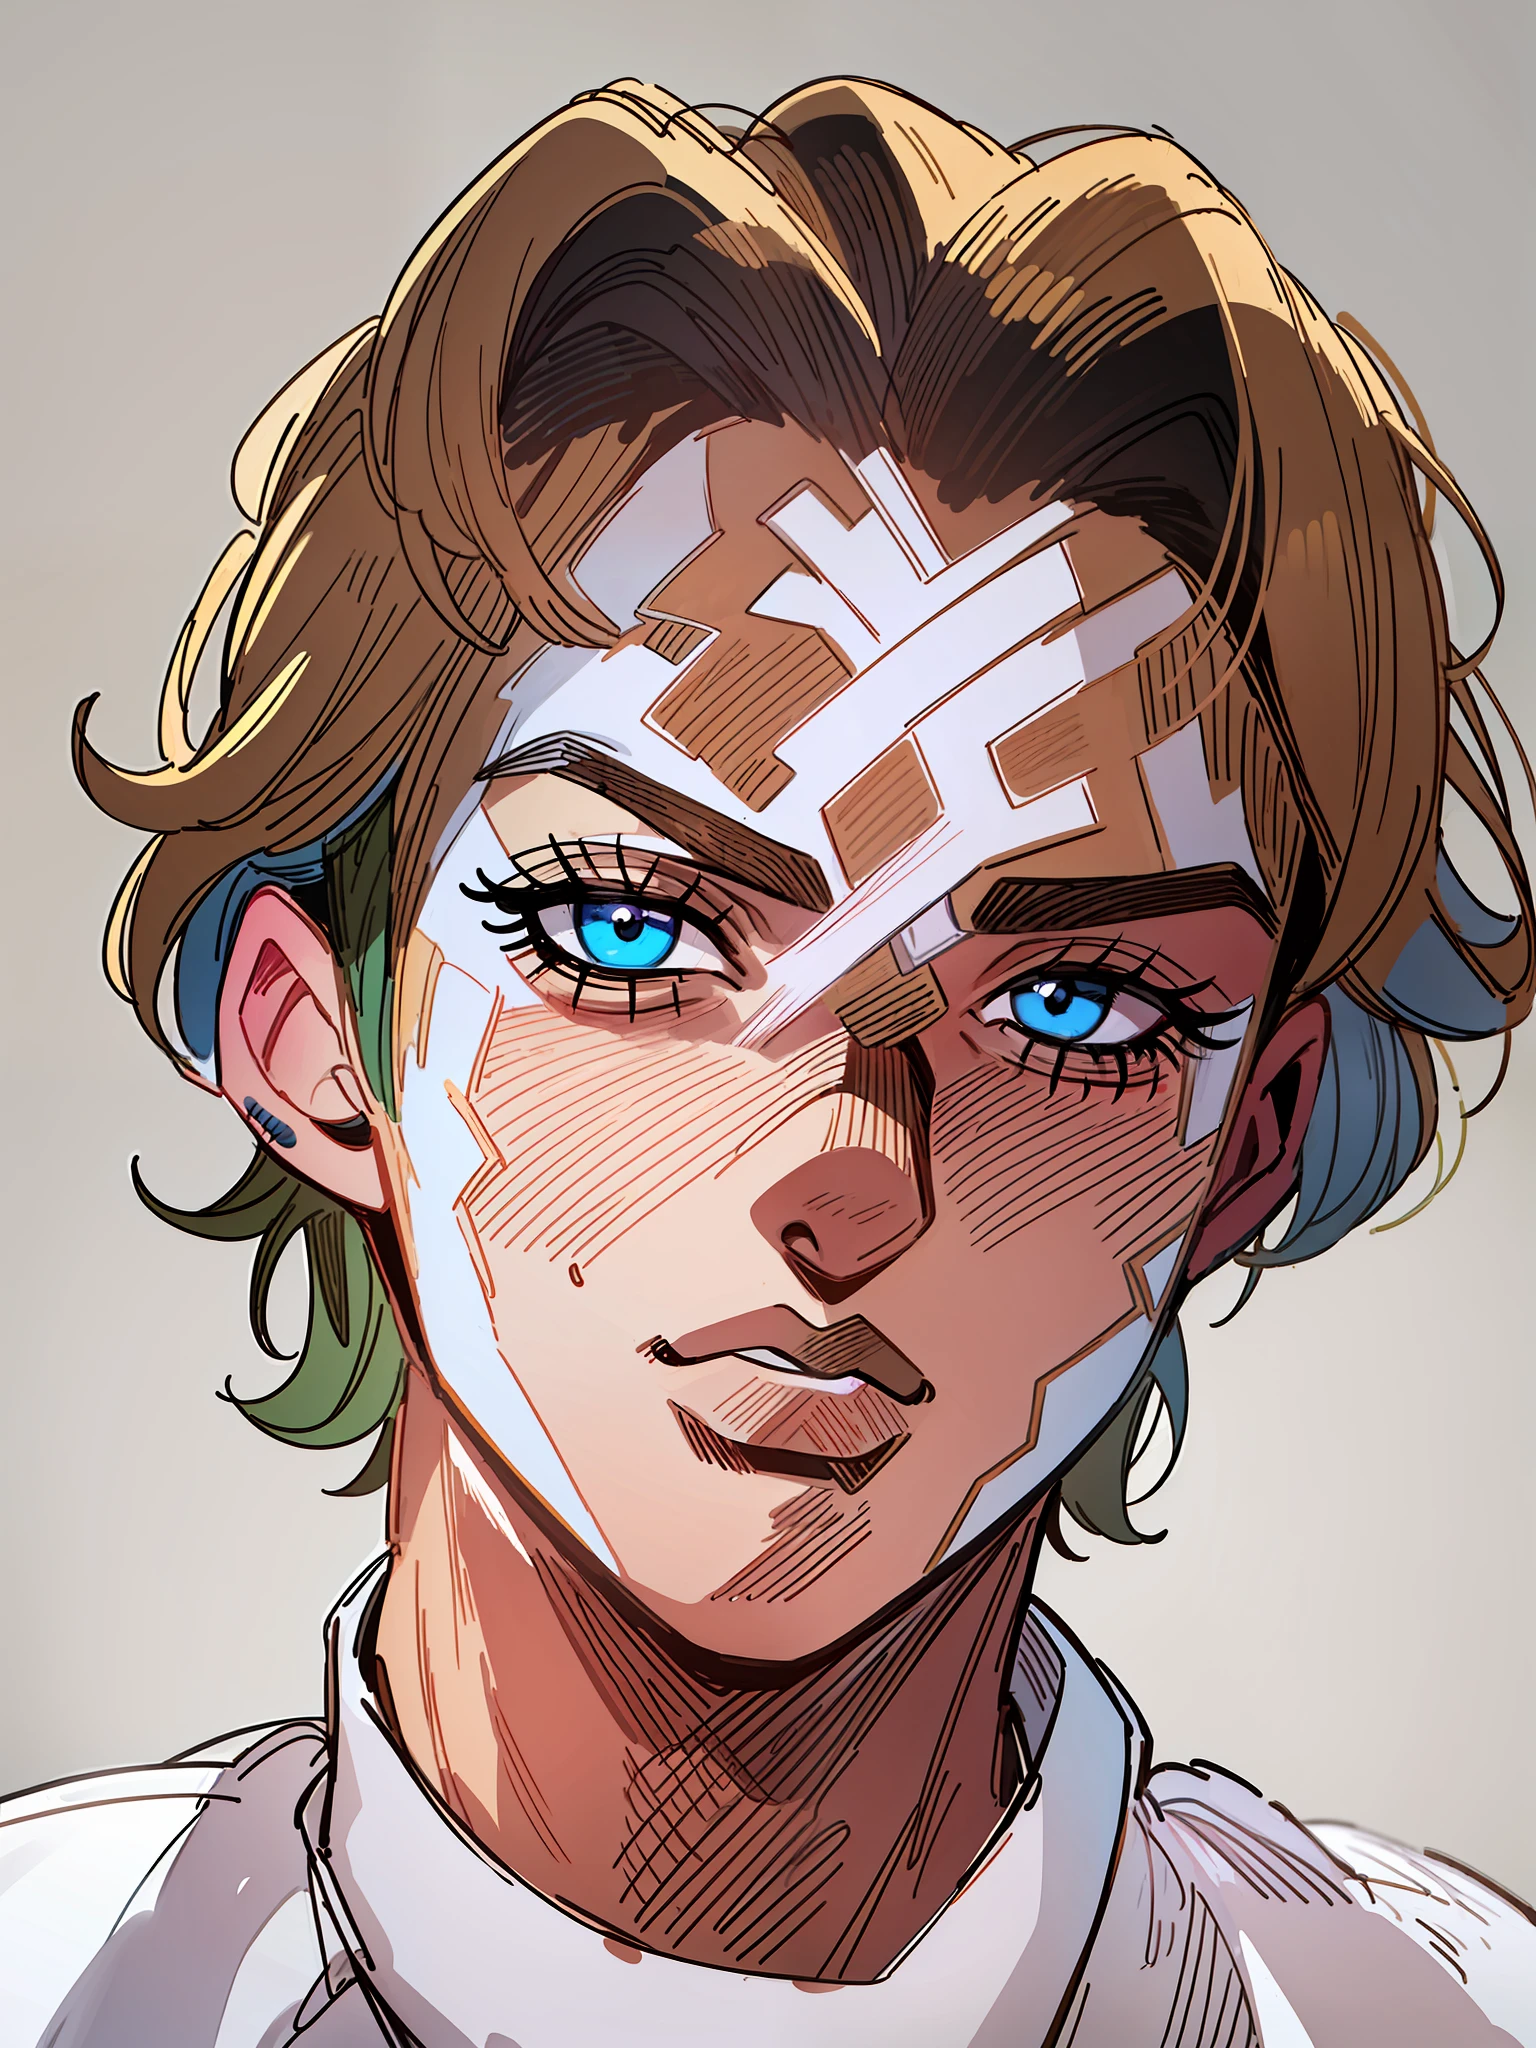 HD, (Best Detail) (Best Quality), Meticulous Eyes, Meticulous Facial Features, Arad Man with White Shirt and White Shirt, (JOJO), Yuhiko Araki